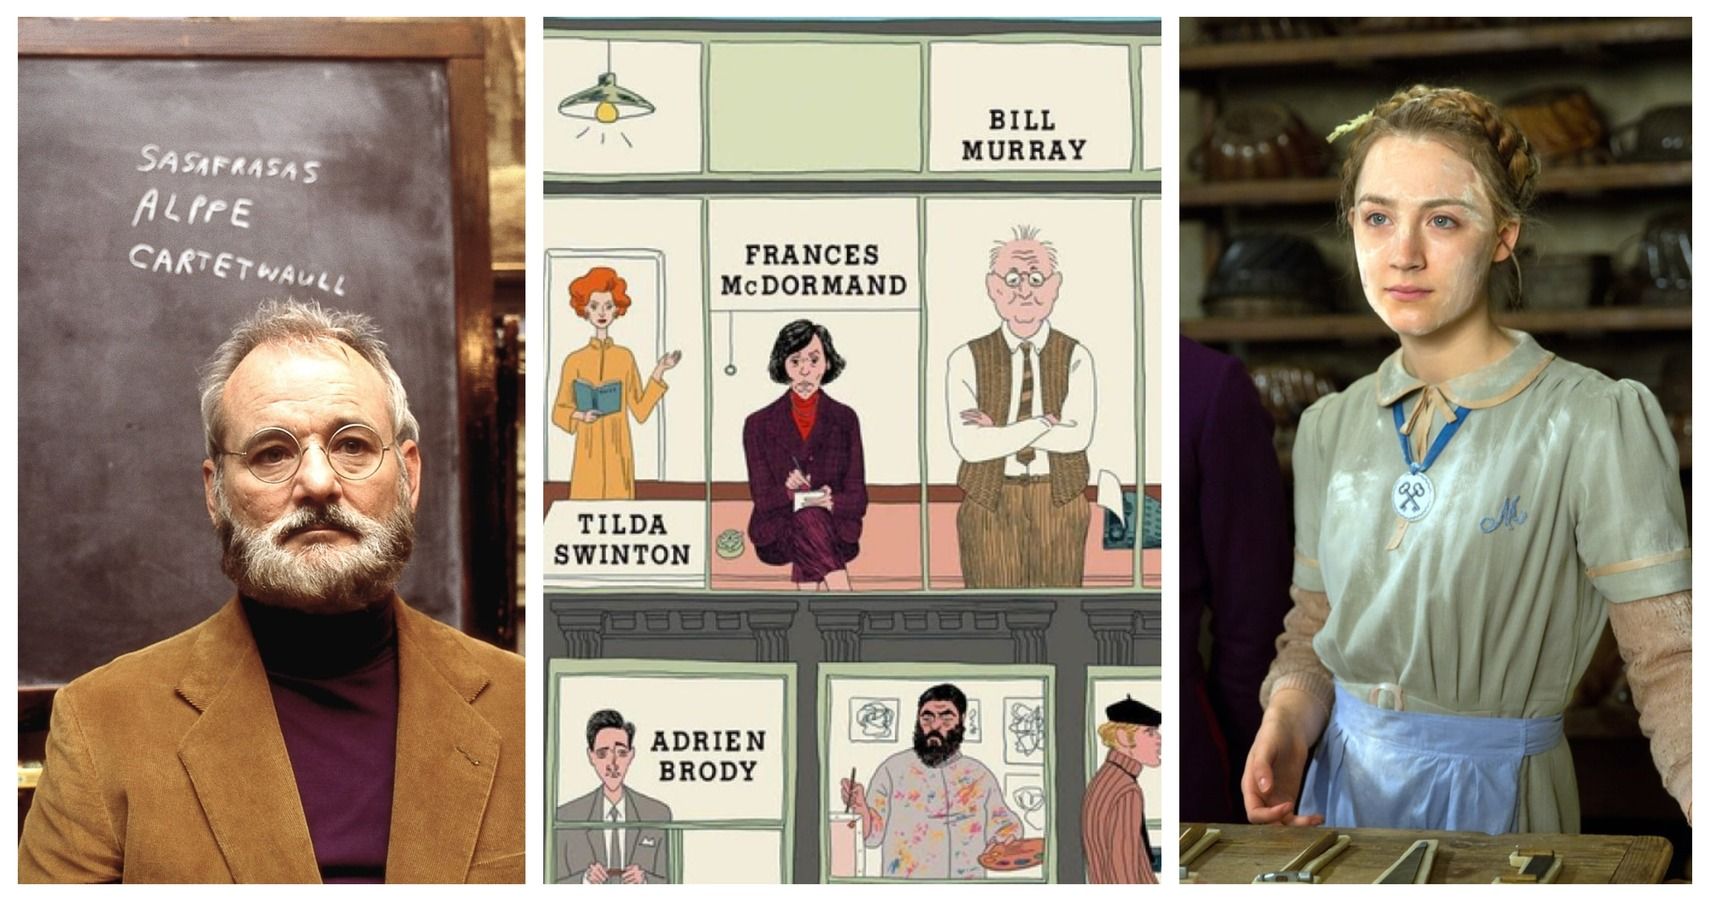 watch wes anderson french dispatch